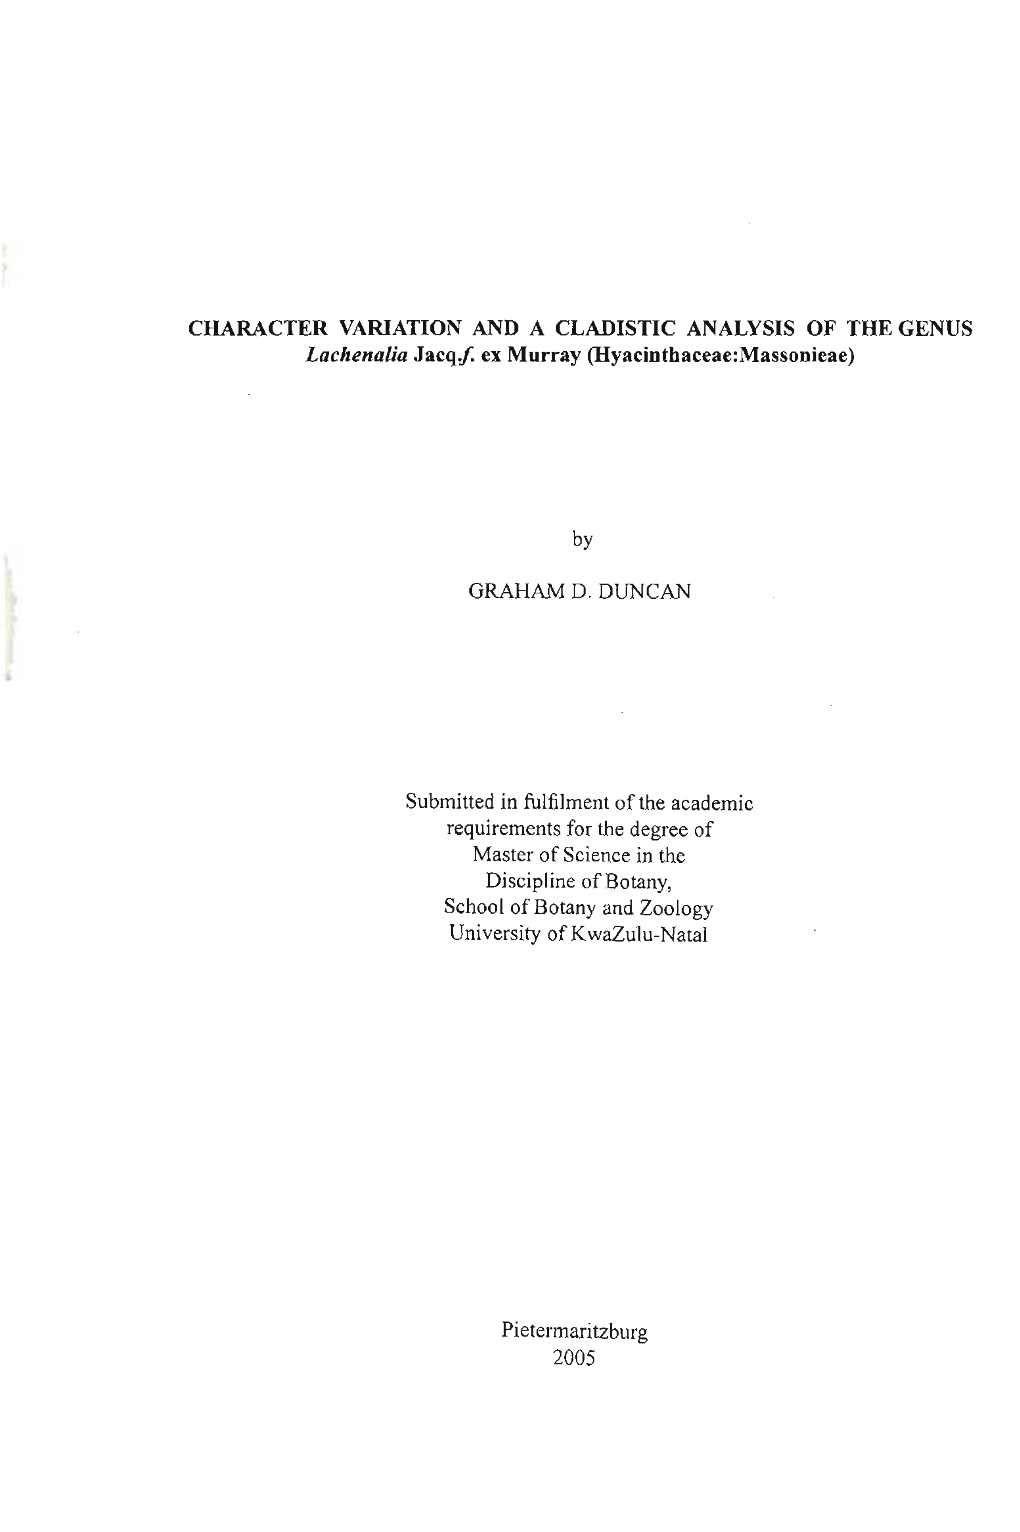 CHARACTER VARIATION and a CLADISTIC ANALYSIS of the GENUS Lachenalia Jacq:F